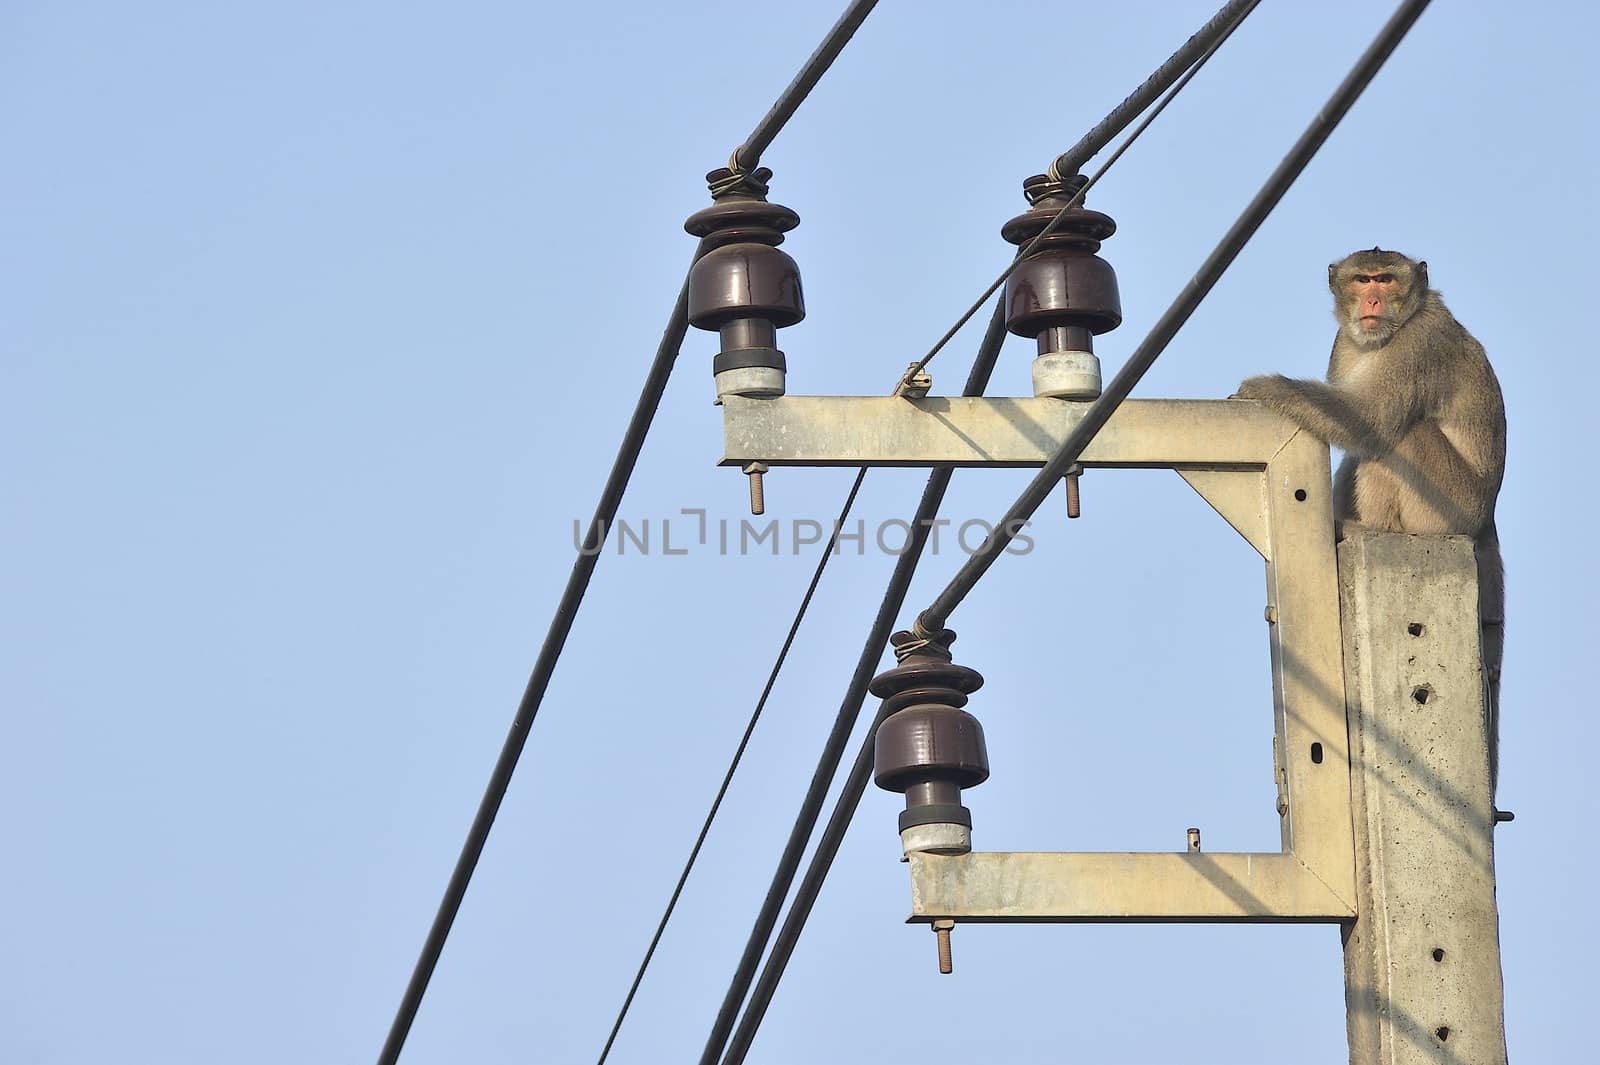 Monkey hanging on electric wires by think4photop